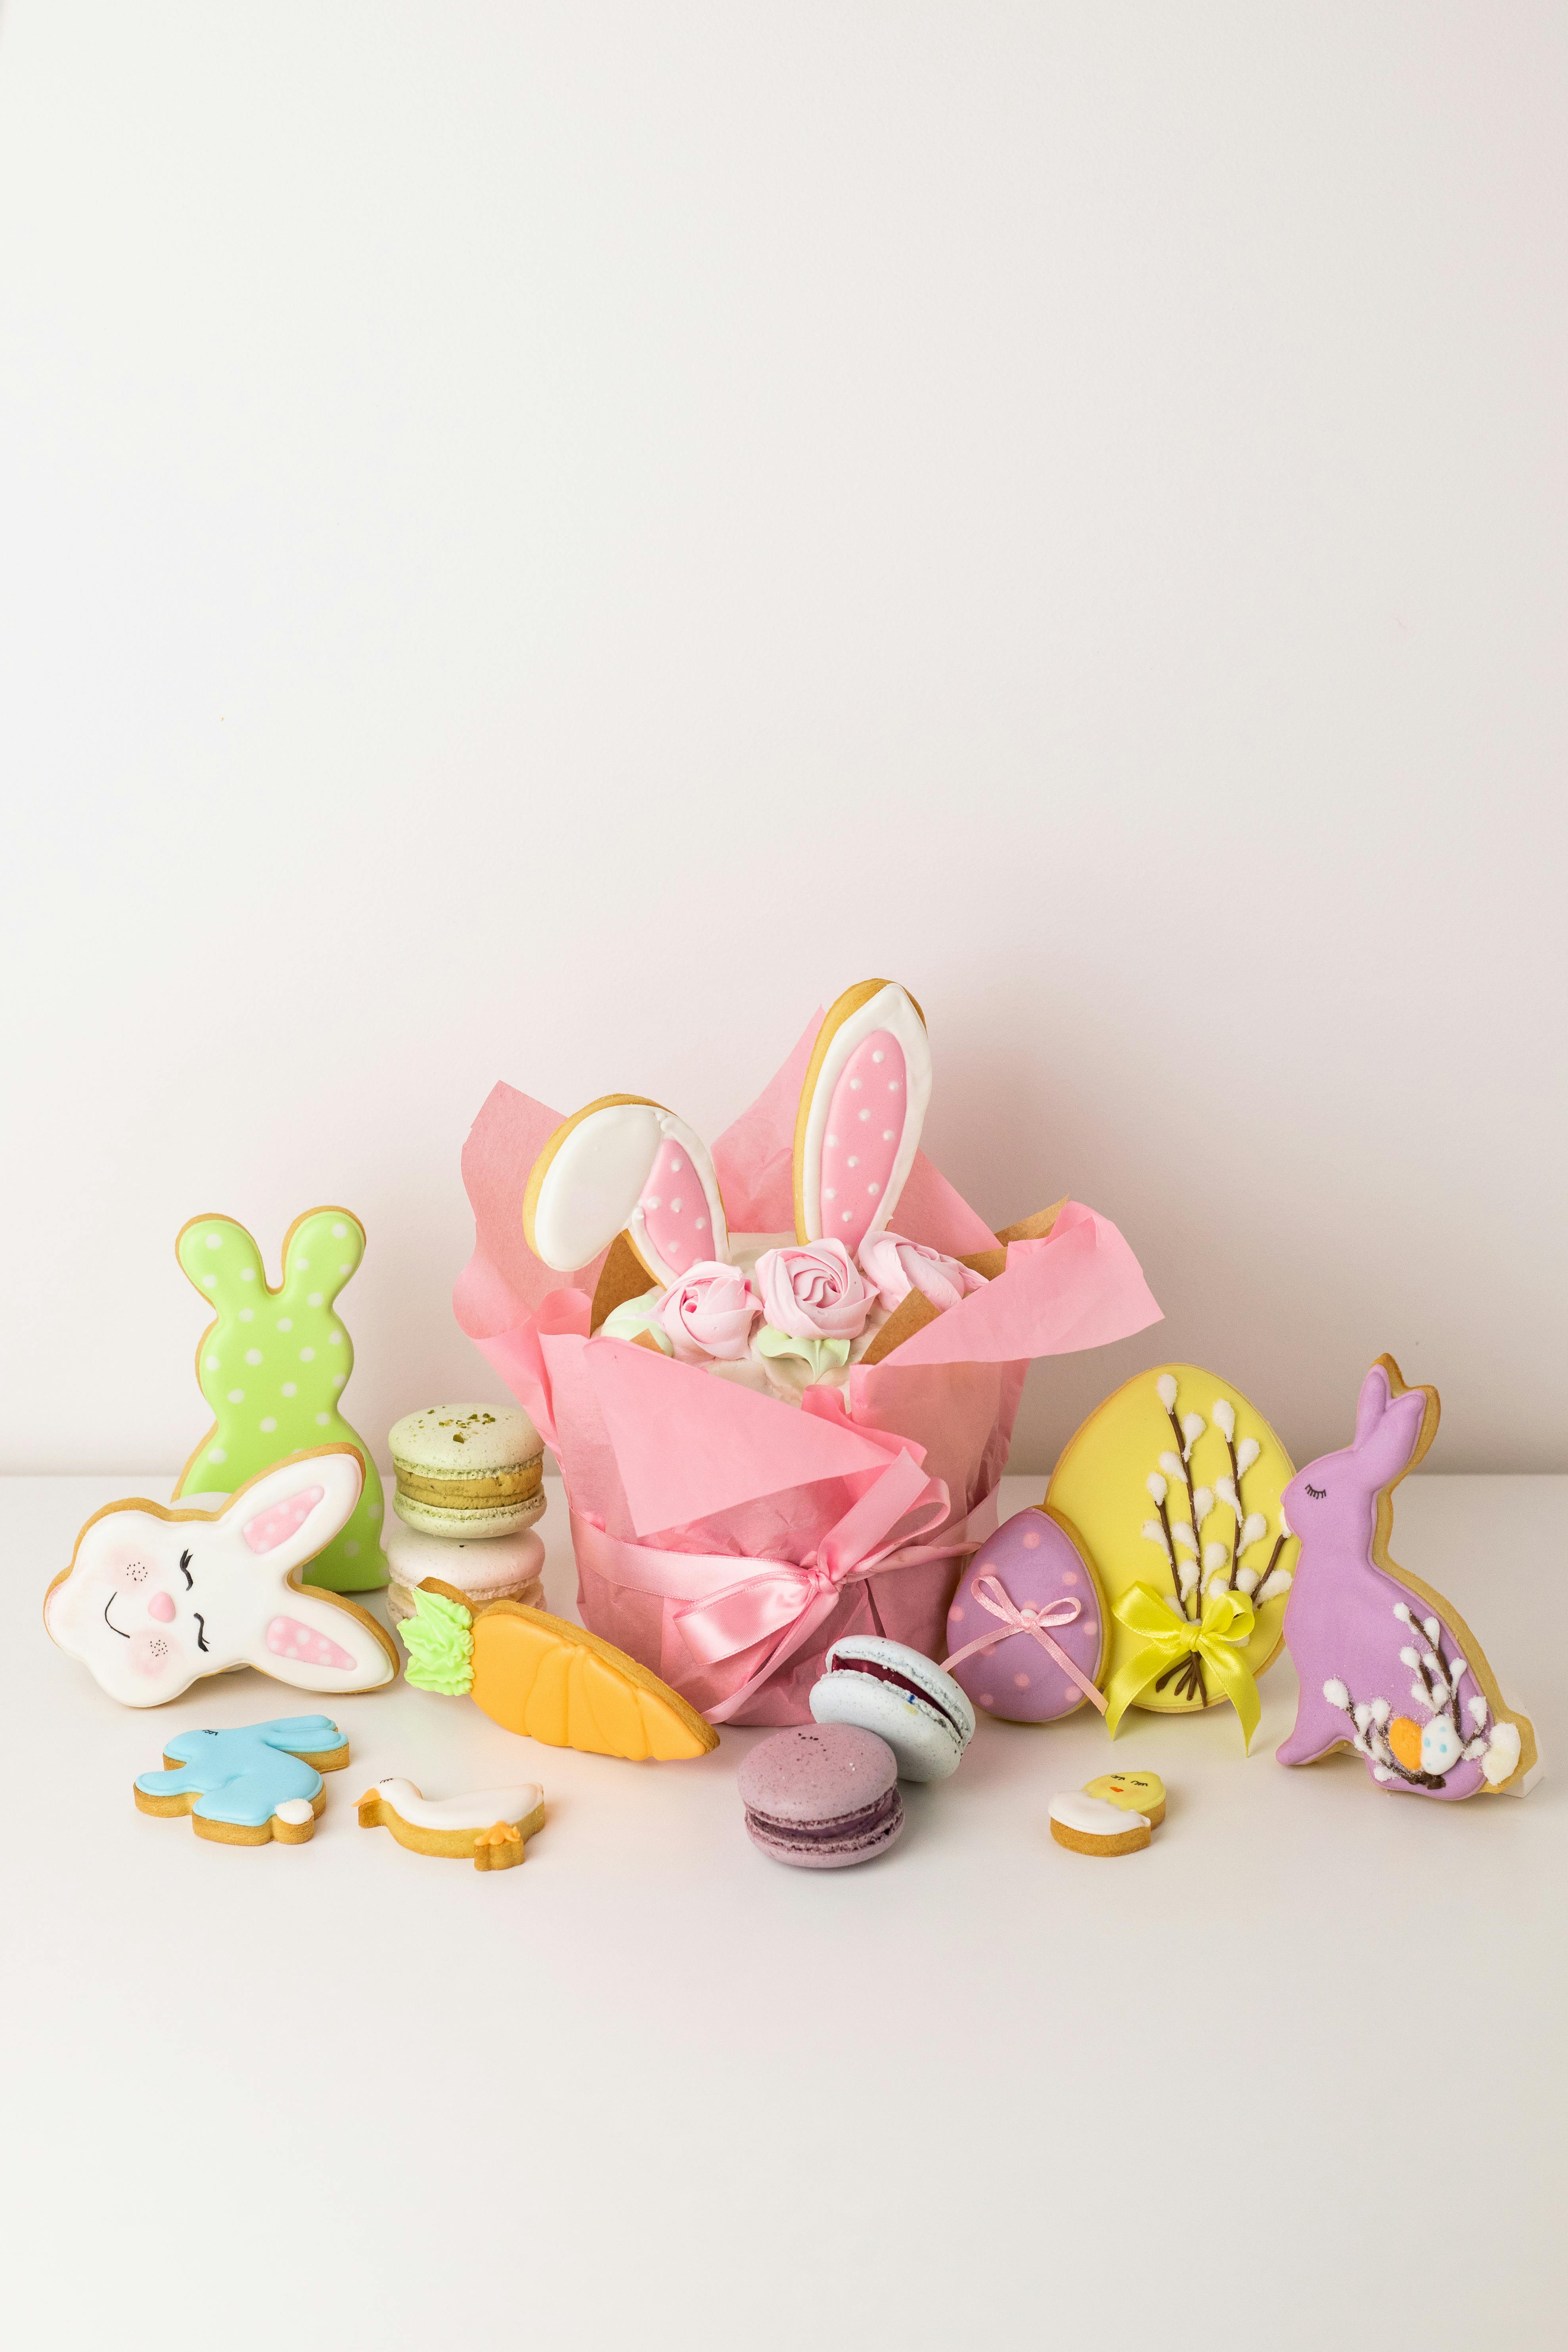 easter pastries on a white surface